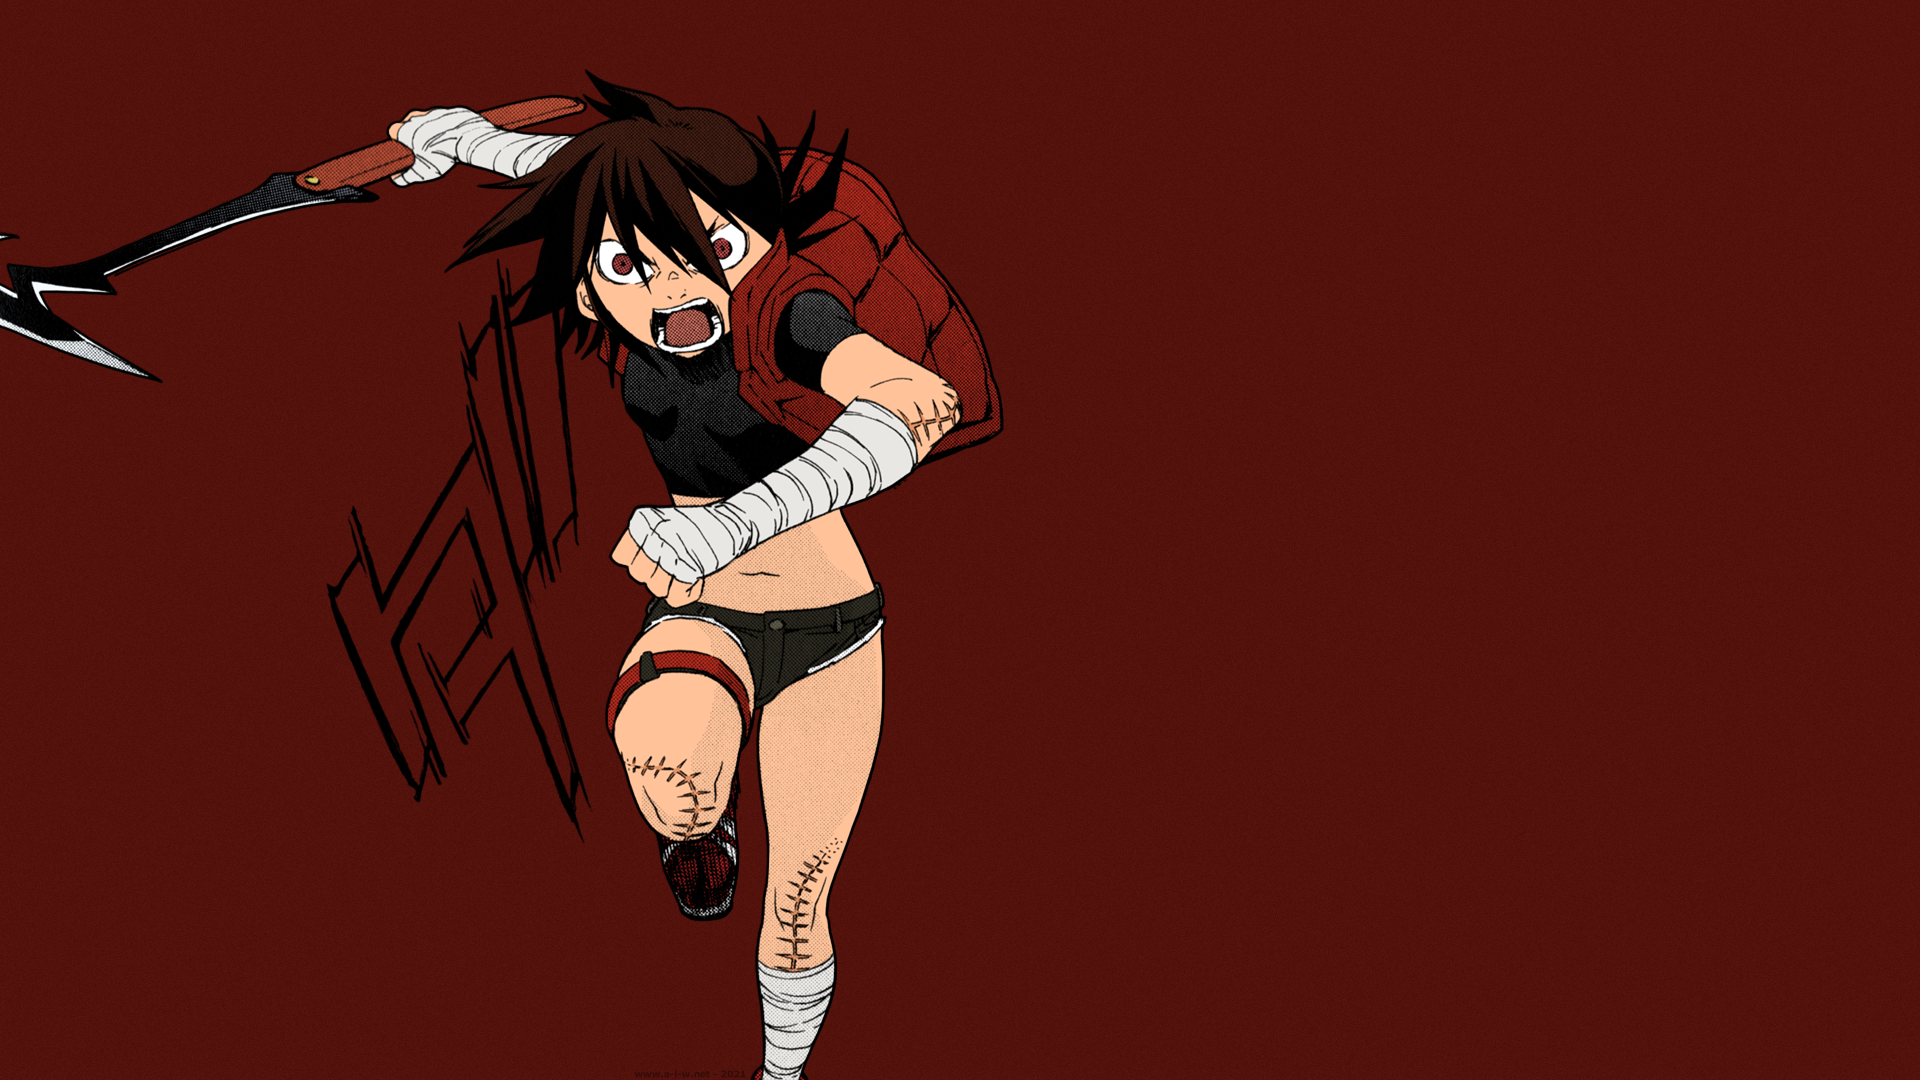 Trash D P Shirato Marin Short Hair Brunette Short Pants Tomboys Scars Bandage Angry Weapon Axes Red  1920x1080